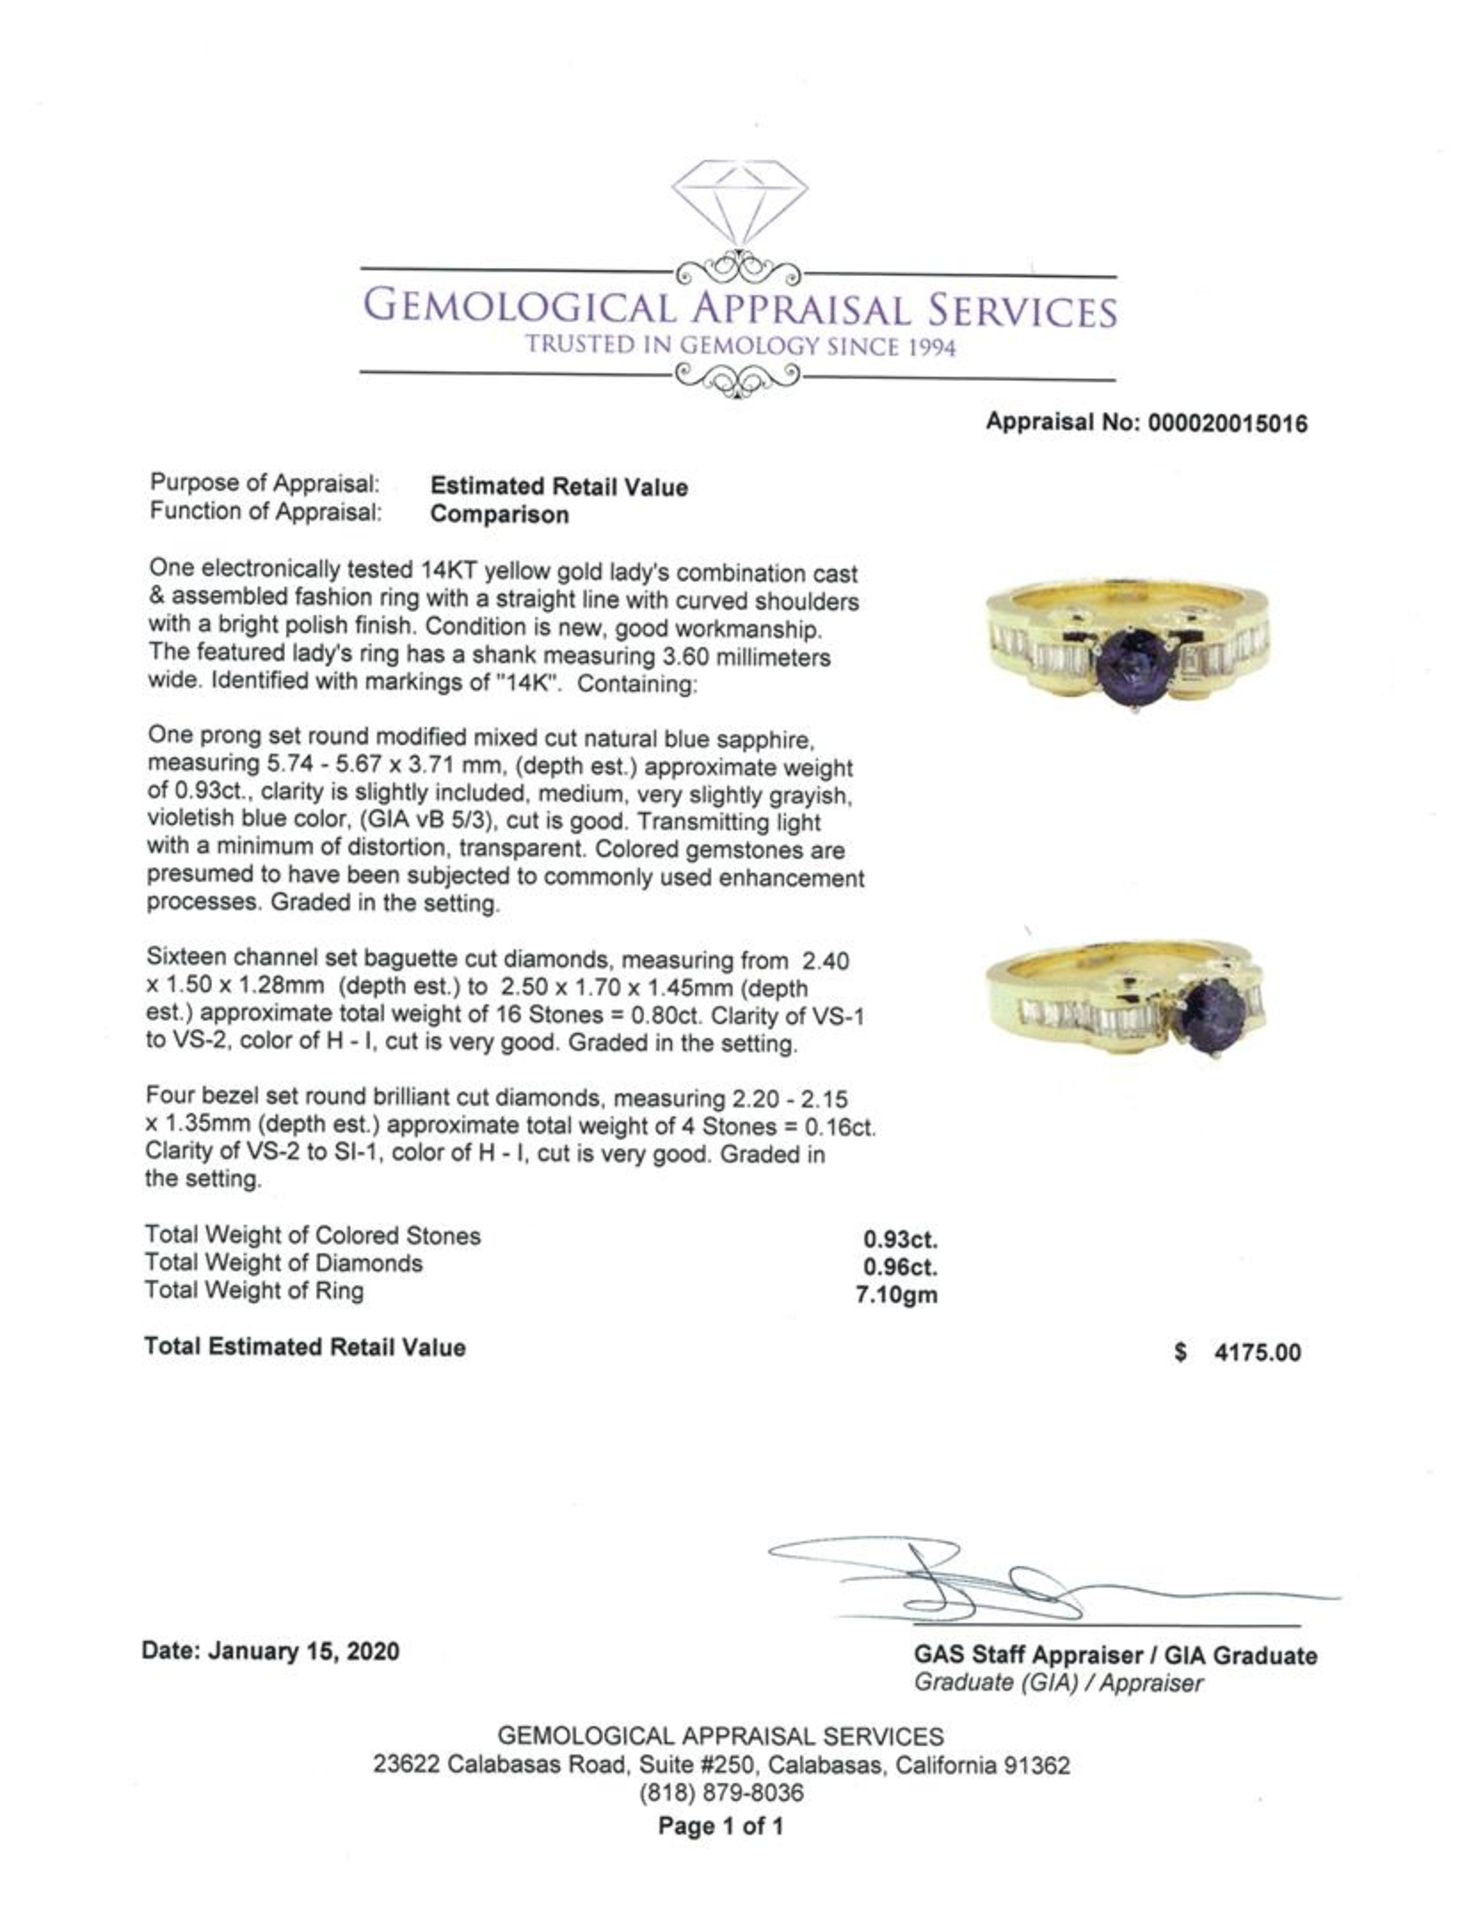 1.89 ctw Blue Sapphire And Diamond Ring - 14KT Yellow Gold - Image 5 of 5